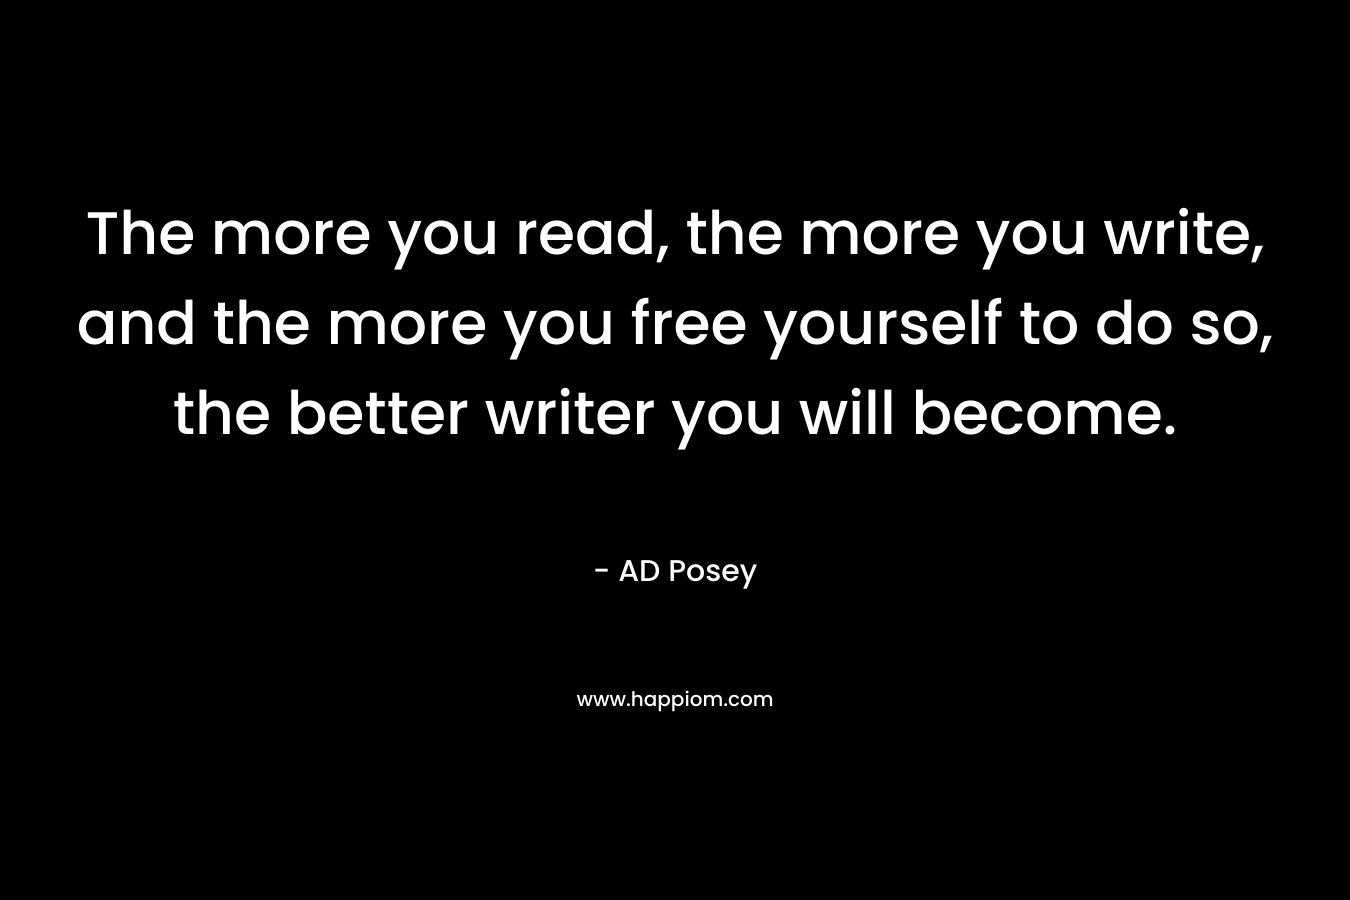 The more you read, the more you write, and the more you free yourself to do so, the better writer you will become.